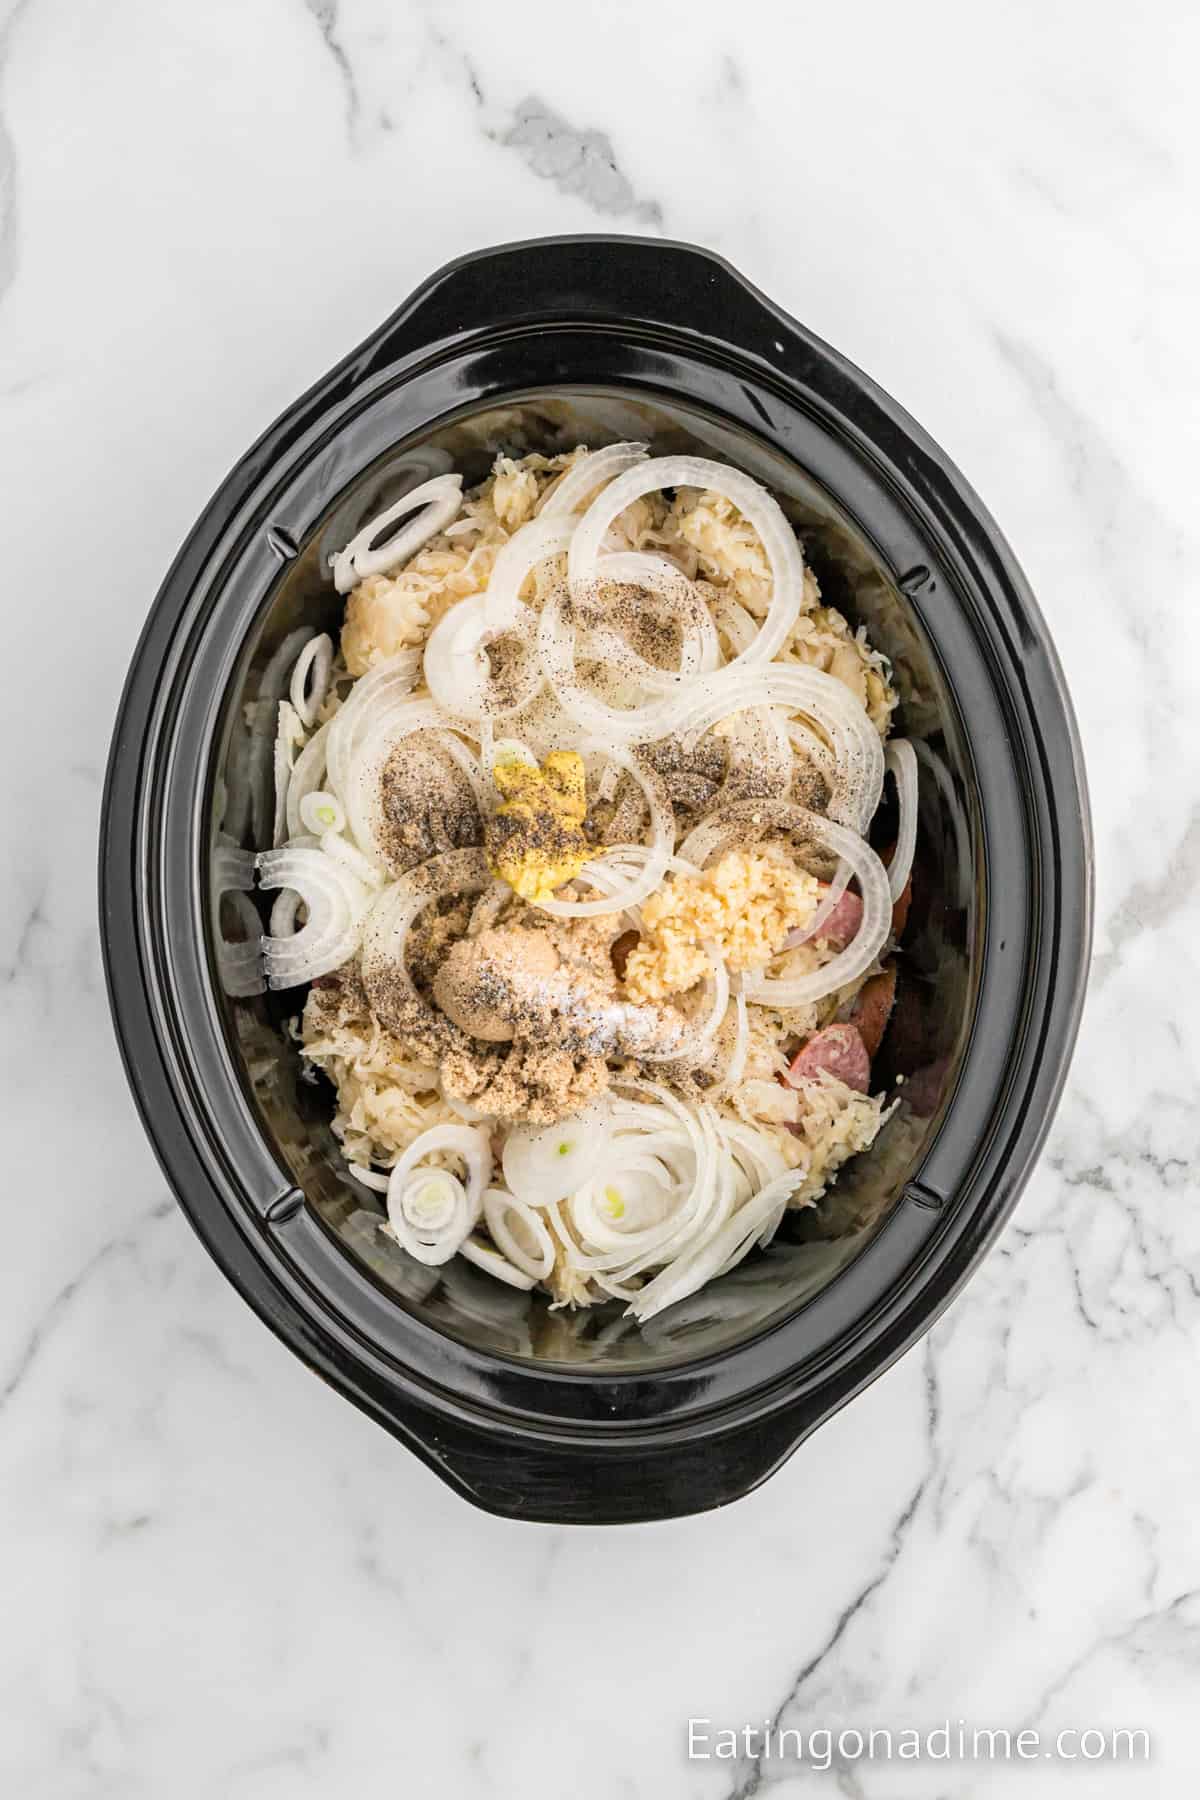 A black slow cooker on a marble countertop filled with sliced onions, seasoned chopped ingredients, and visible black pepper and minced garlic on top. The food looks uncooked. The website "Eatingonadime.com" is visible in the bottom right corner, featuring Slow Cooker Kielbasa and Sauerkraut recipes.